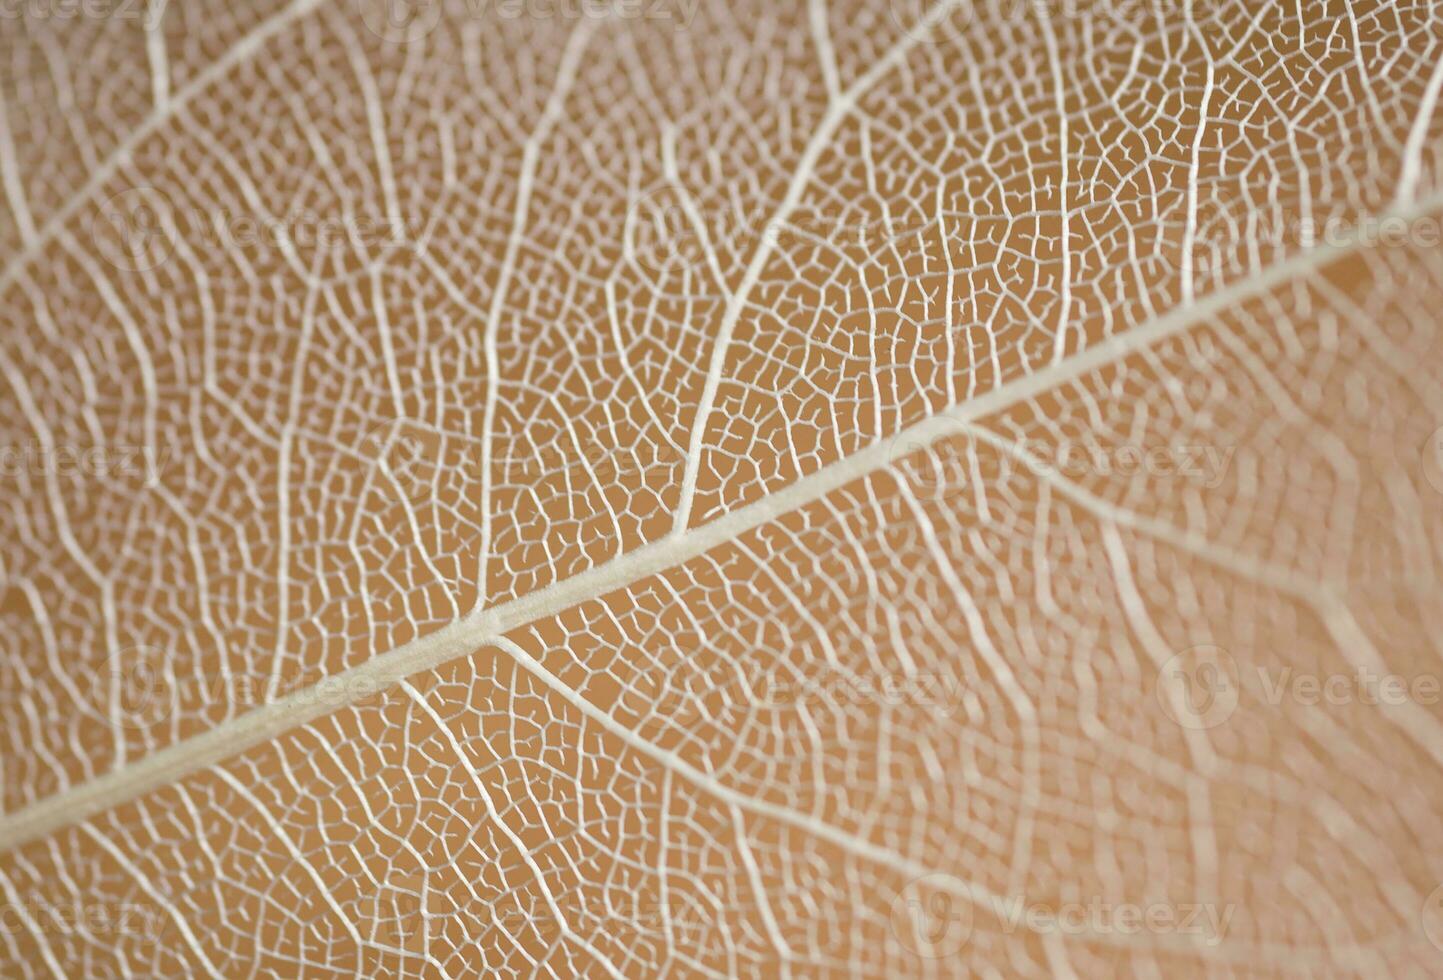 interesting natural background from a dry leaf with an original pattern photo